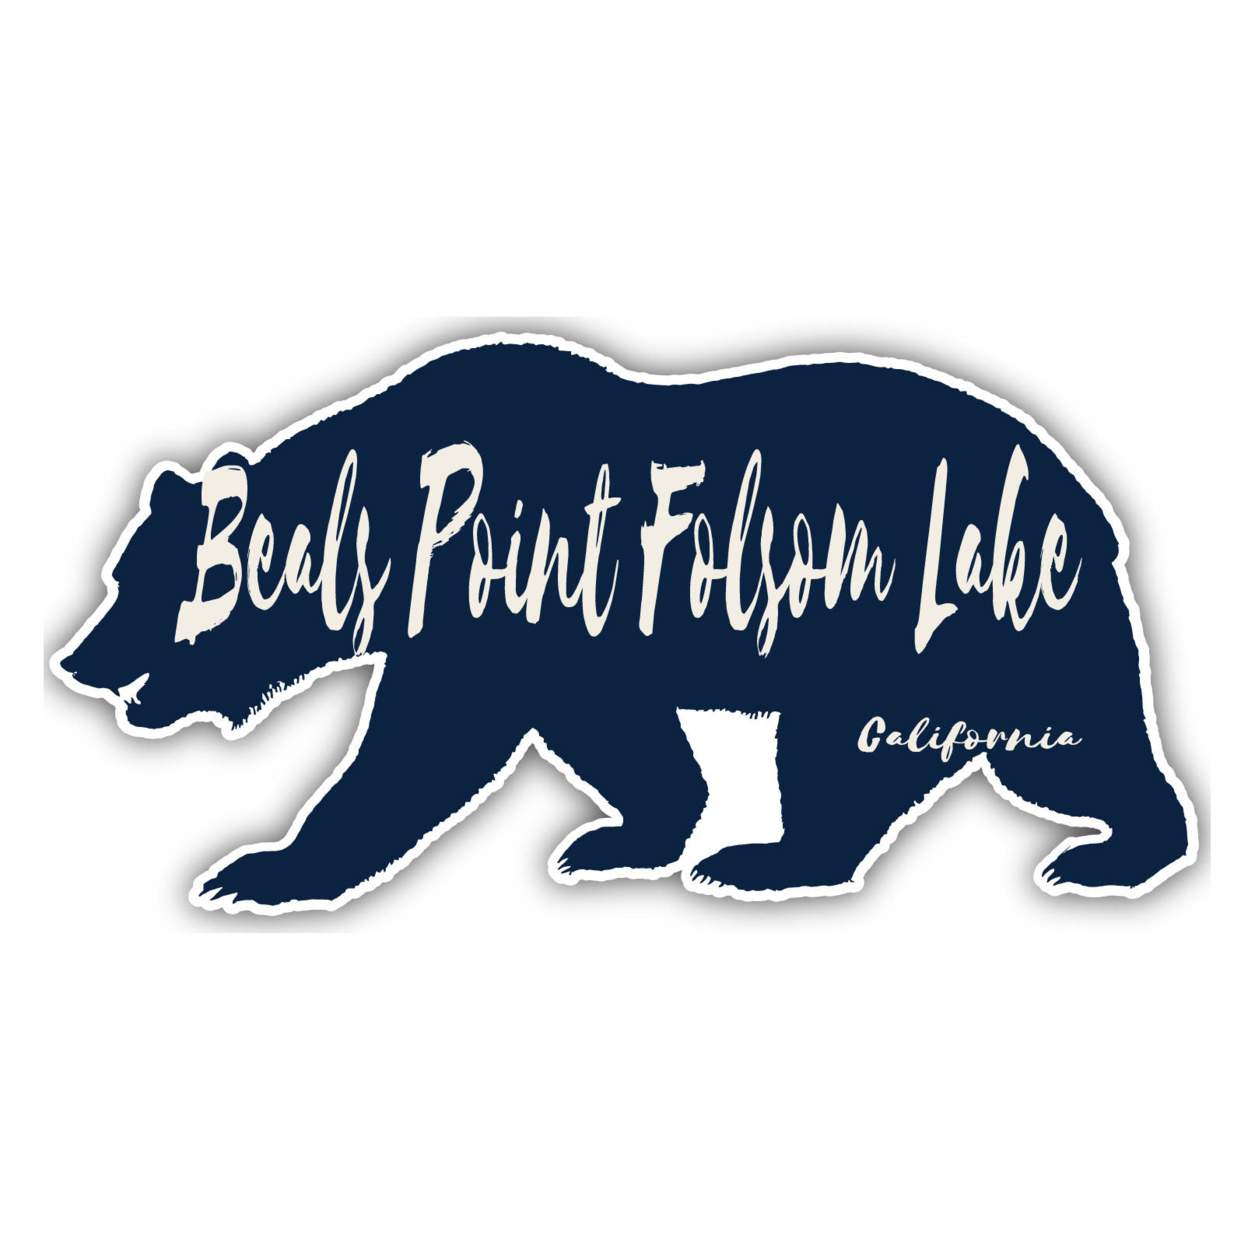 Beals Point Folsom Lake California Souvenir Decorative Stickers (Choose Theme And Size) - 4-Pack, 2-Inch, Tent